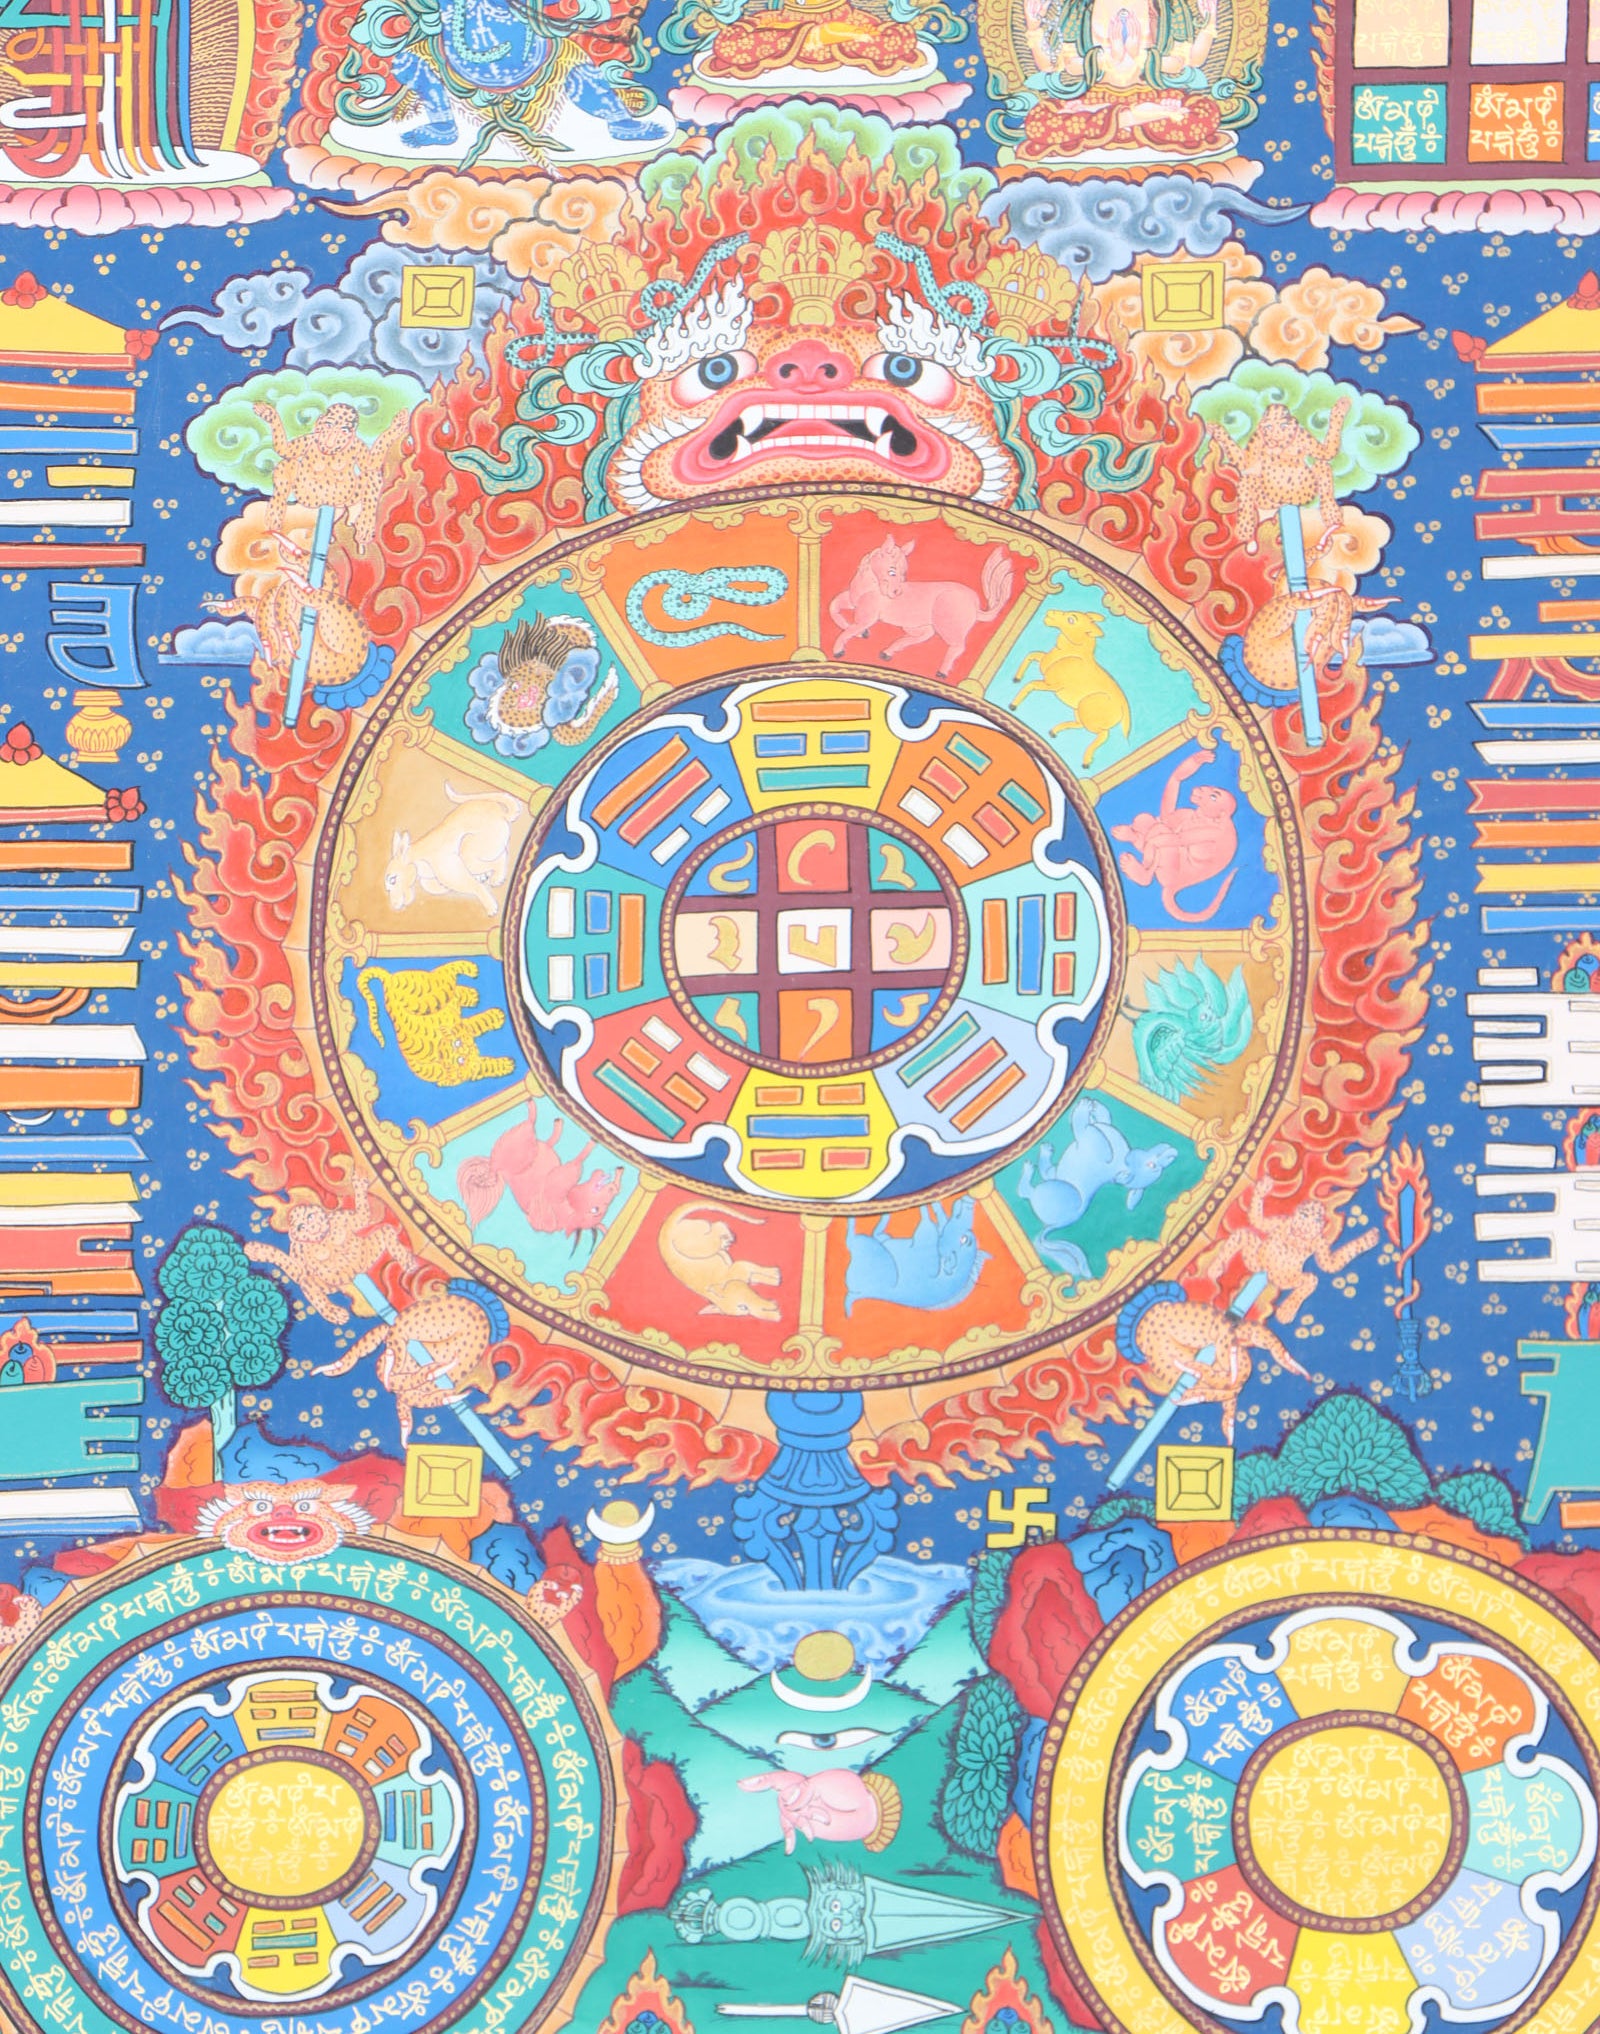 Calender Thangka helps to track time while giving a spiritual focus and reminder of Buddhist teachings.